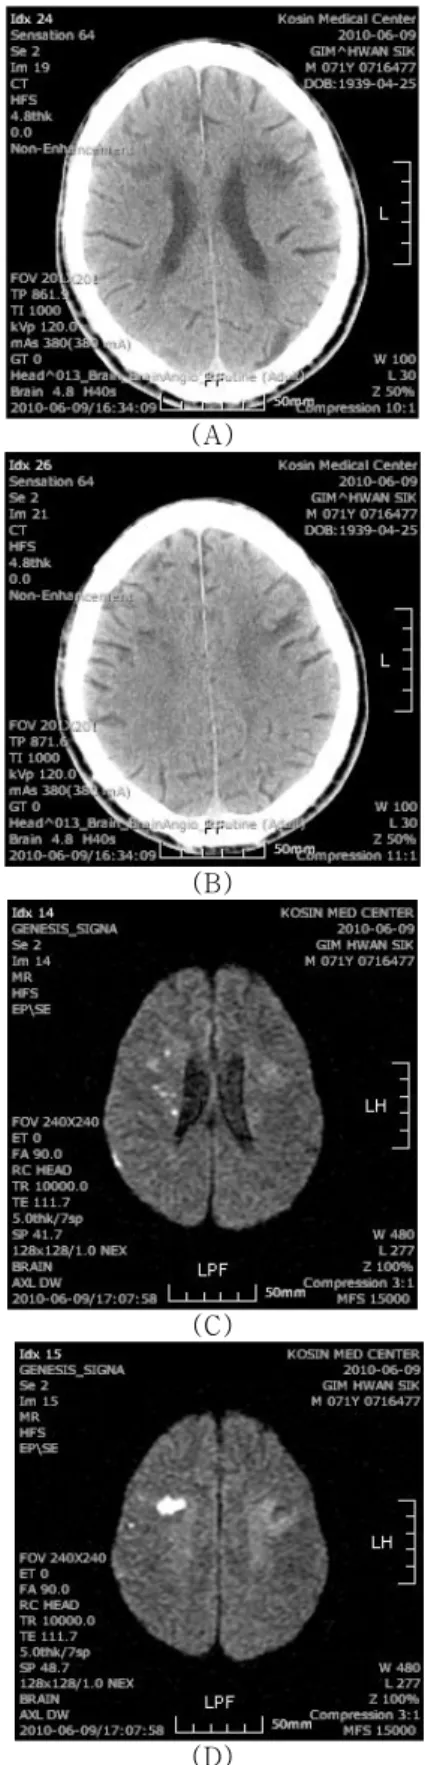 Fig. 1. Brain CT and MRI of a patient. Brain CT shows (D) suspicious low density lesions in the right anterior centrum semiovale region and focal encephalomalacia in the left frontal lobe (A, B)